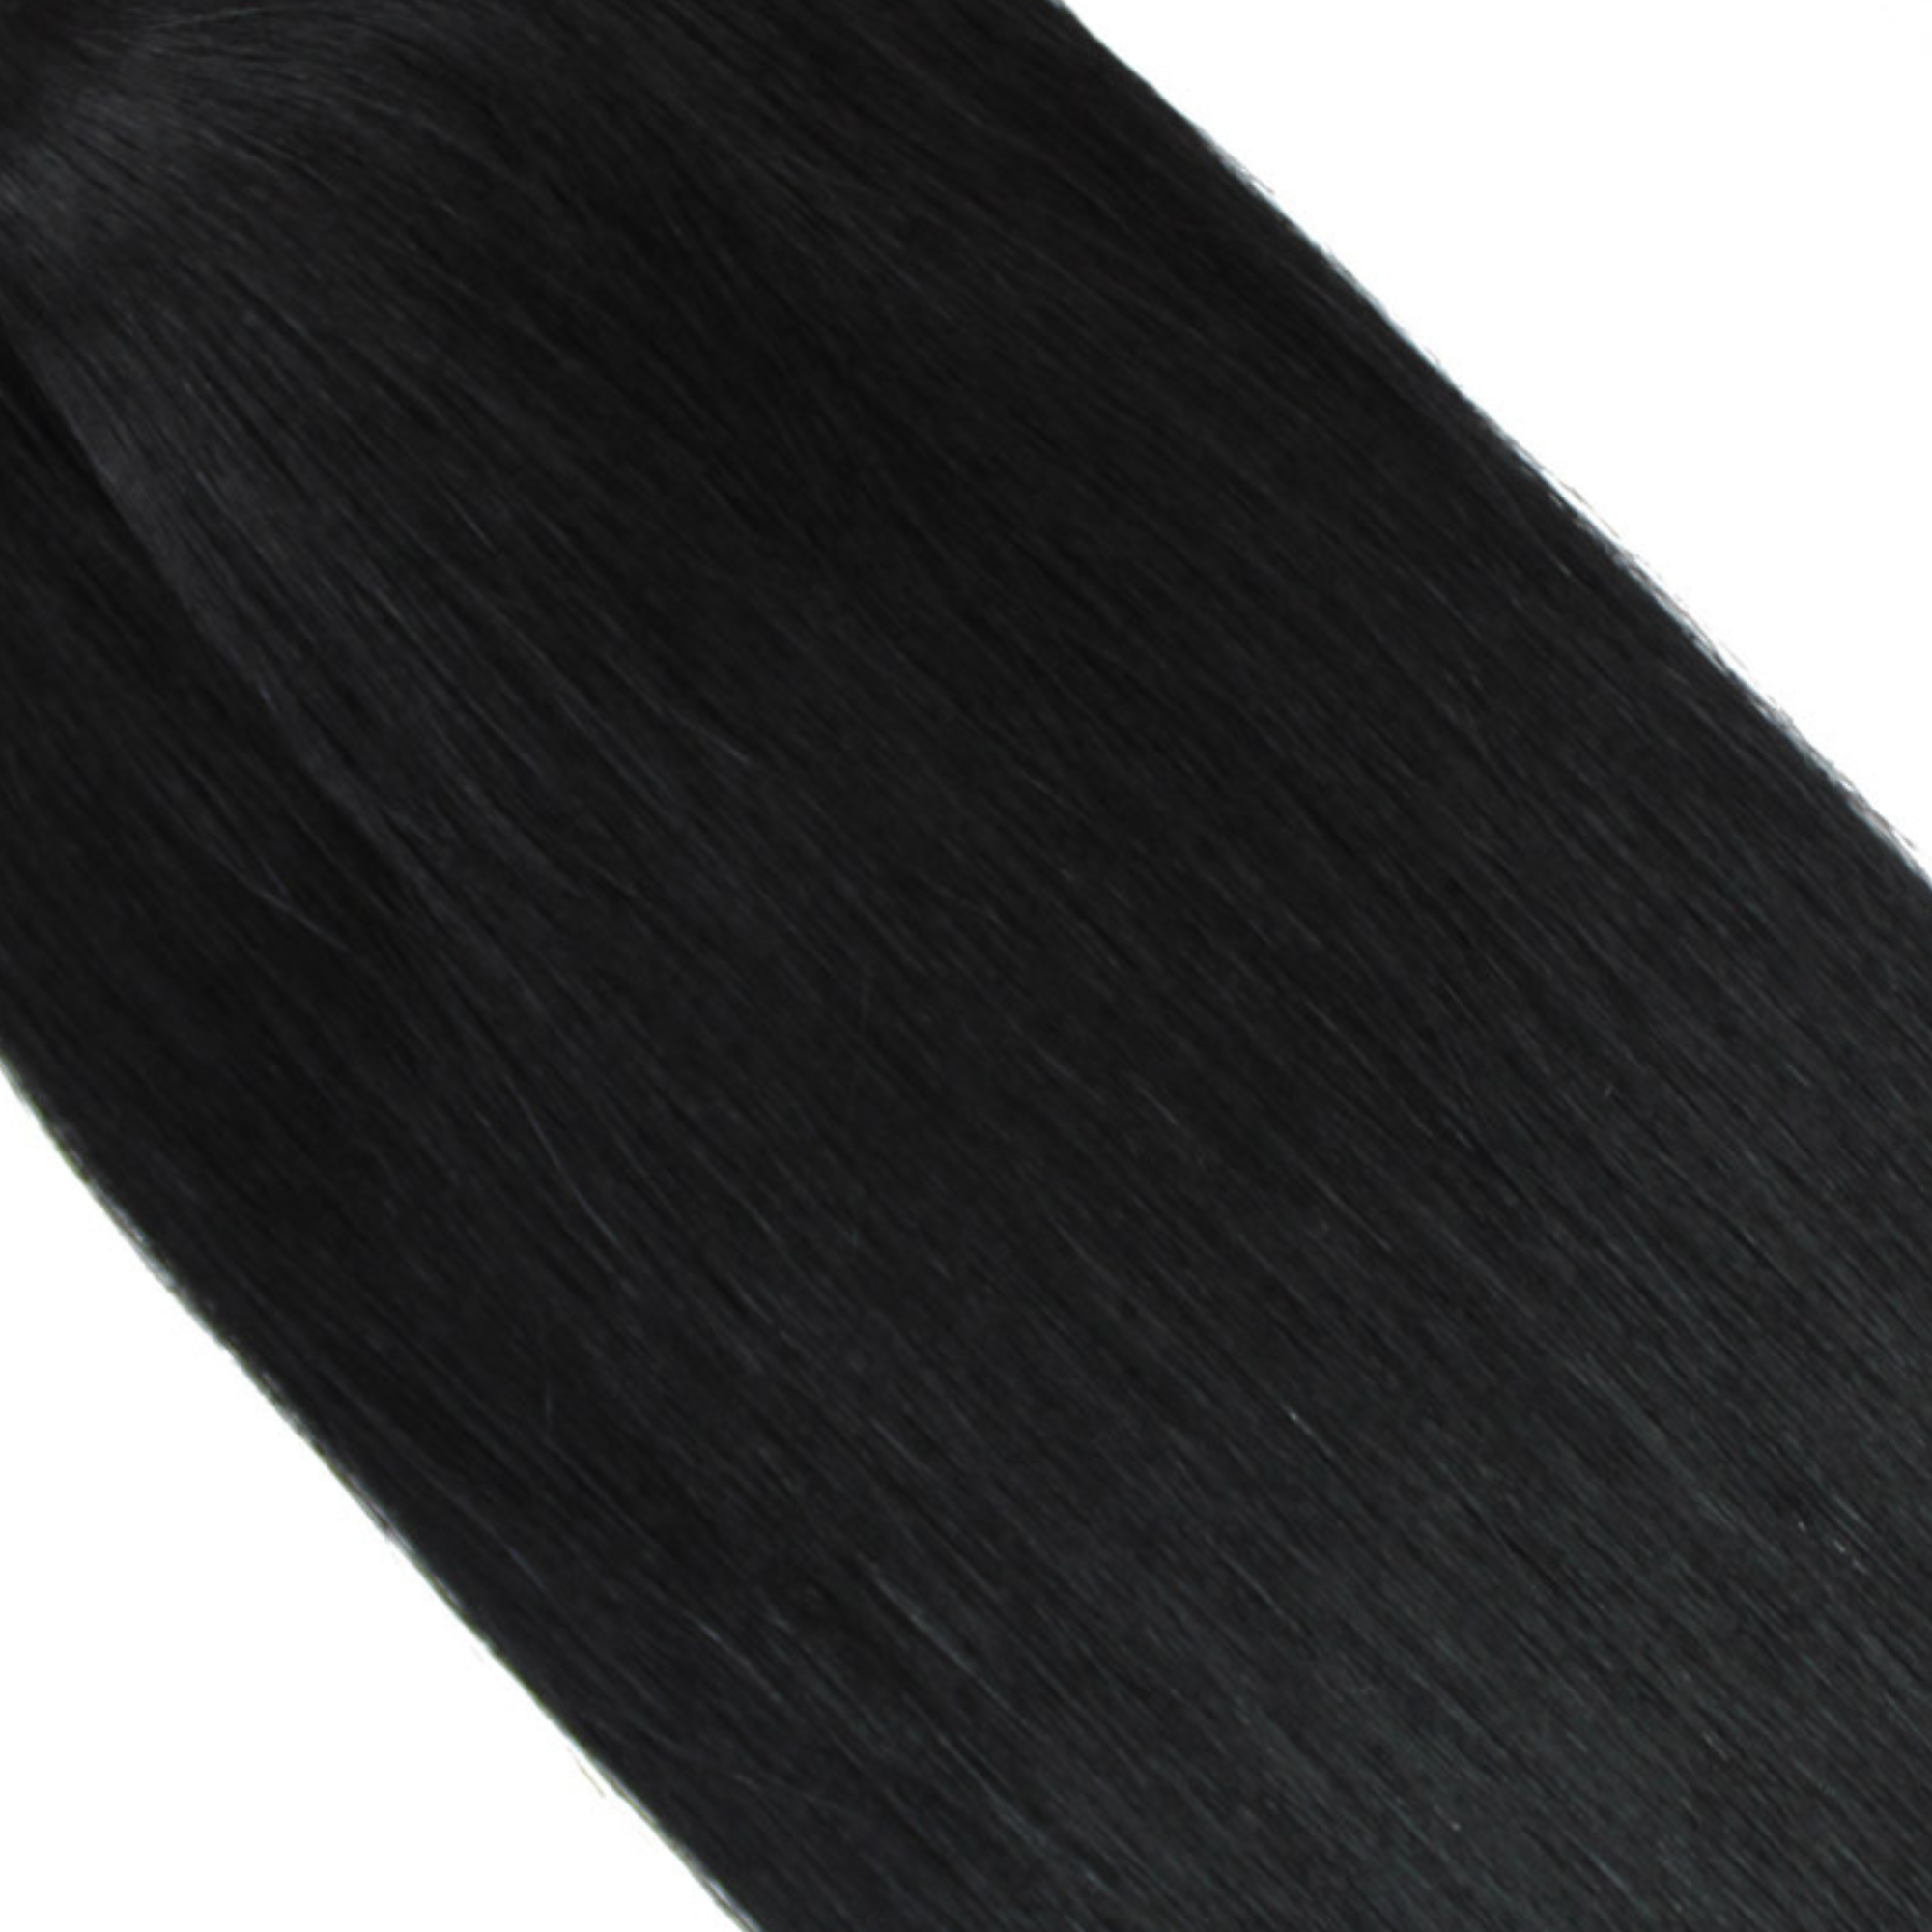 "hair rehab london 18" weft hair extensions shade swatch titled jet black"